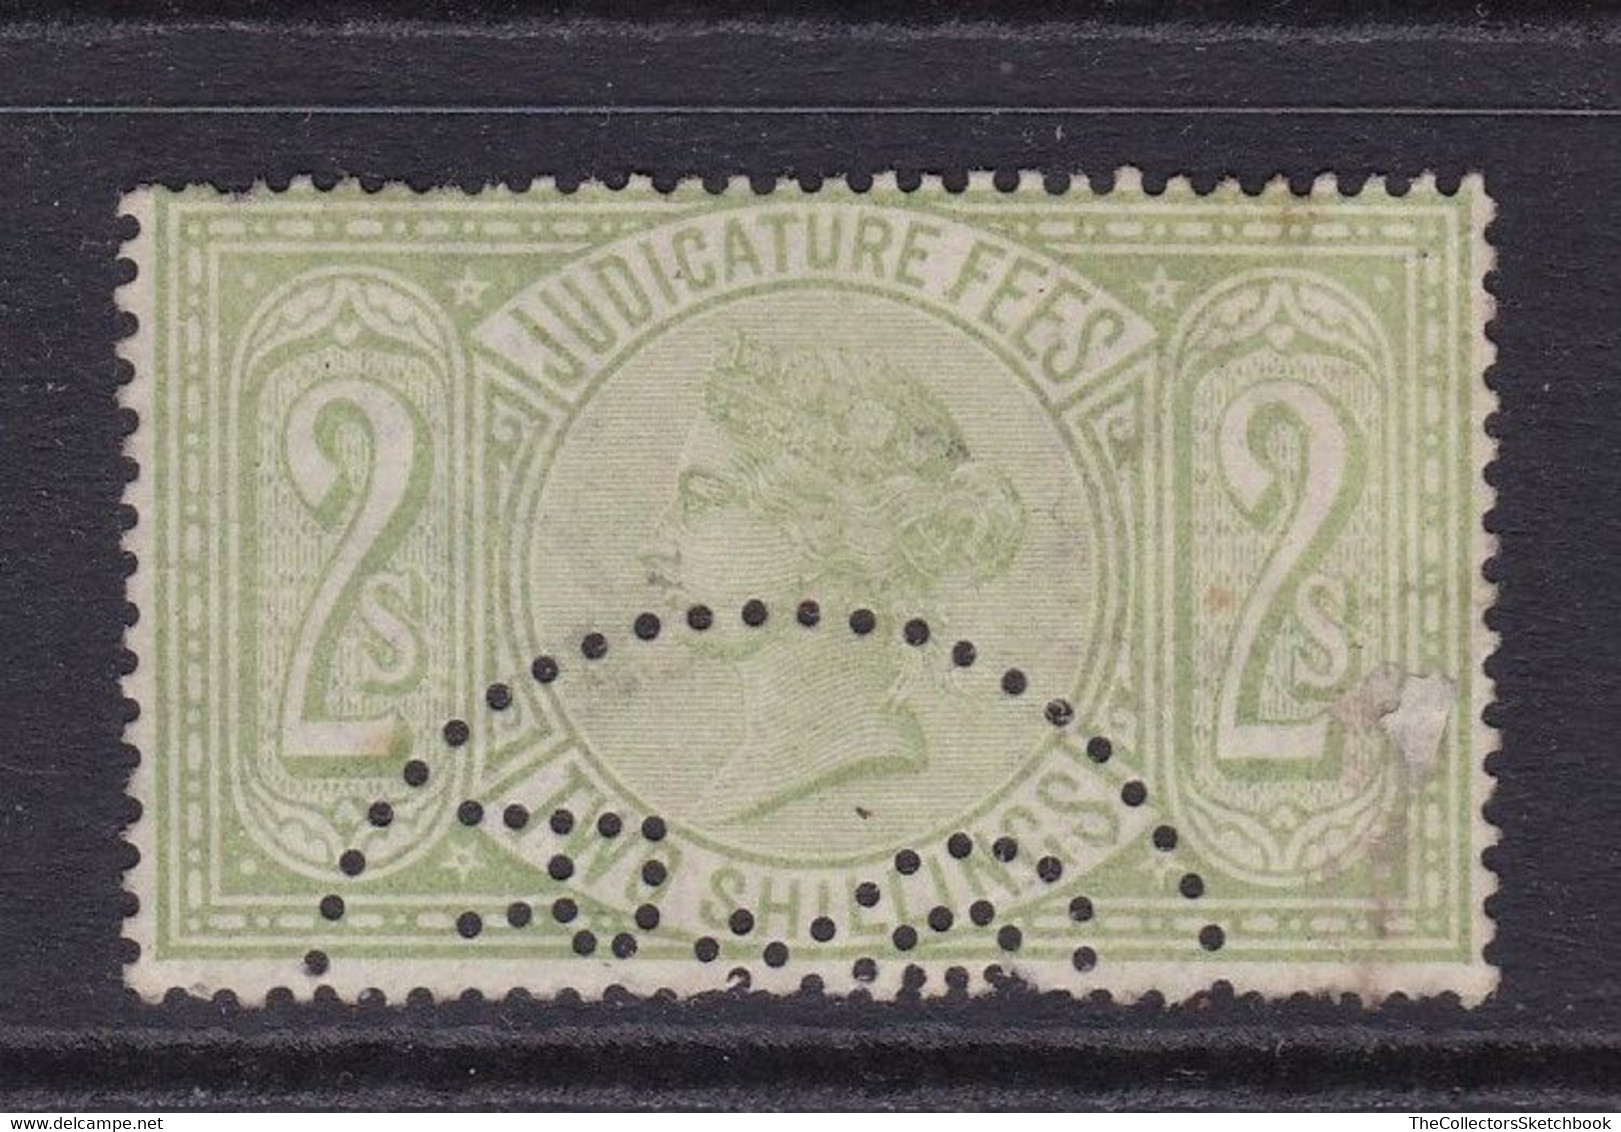 GB Fiscal/ Revenue Stamp.  Judicature Fees 2/- Green Fine Used. Barefoot 35 - Revenue Stamps